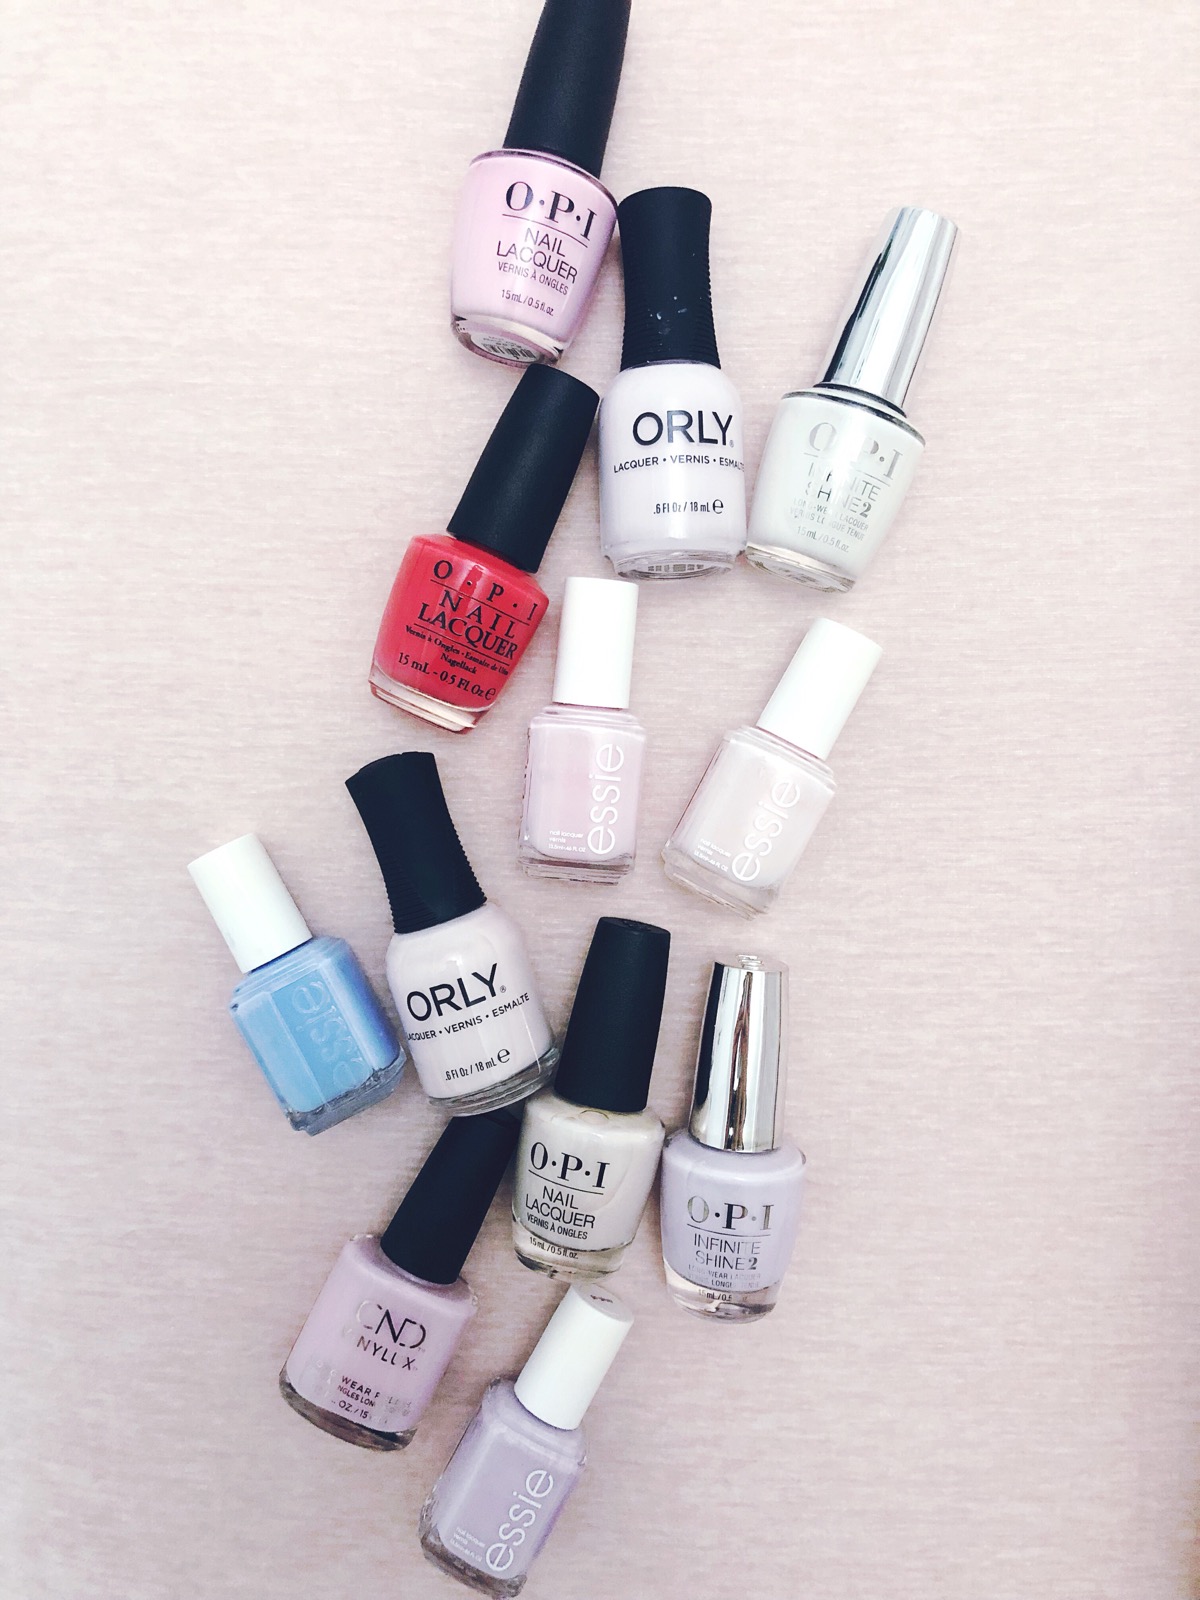 My Favorite Nail Polish System Ever! - Sincerely Stacie